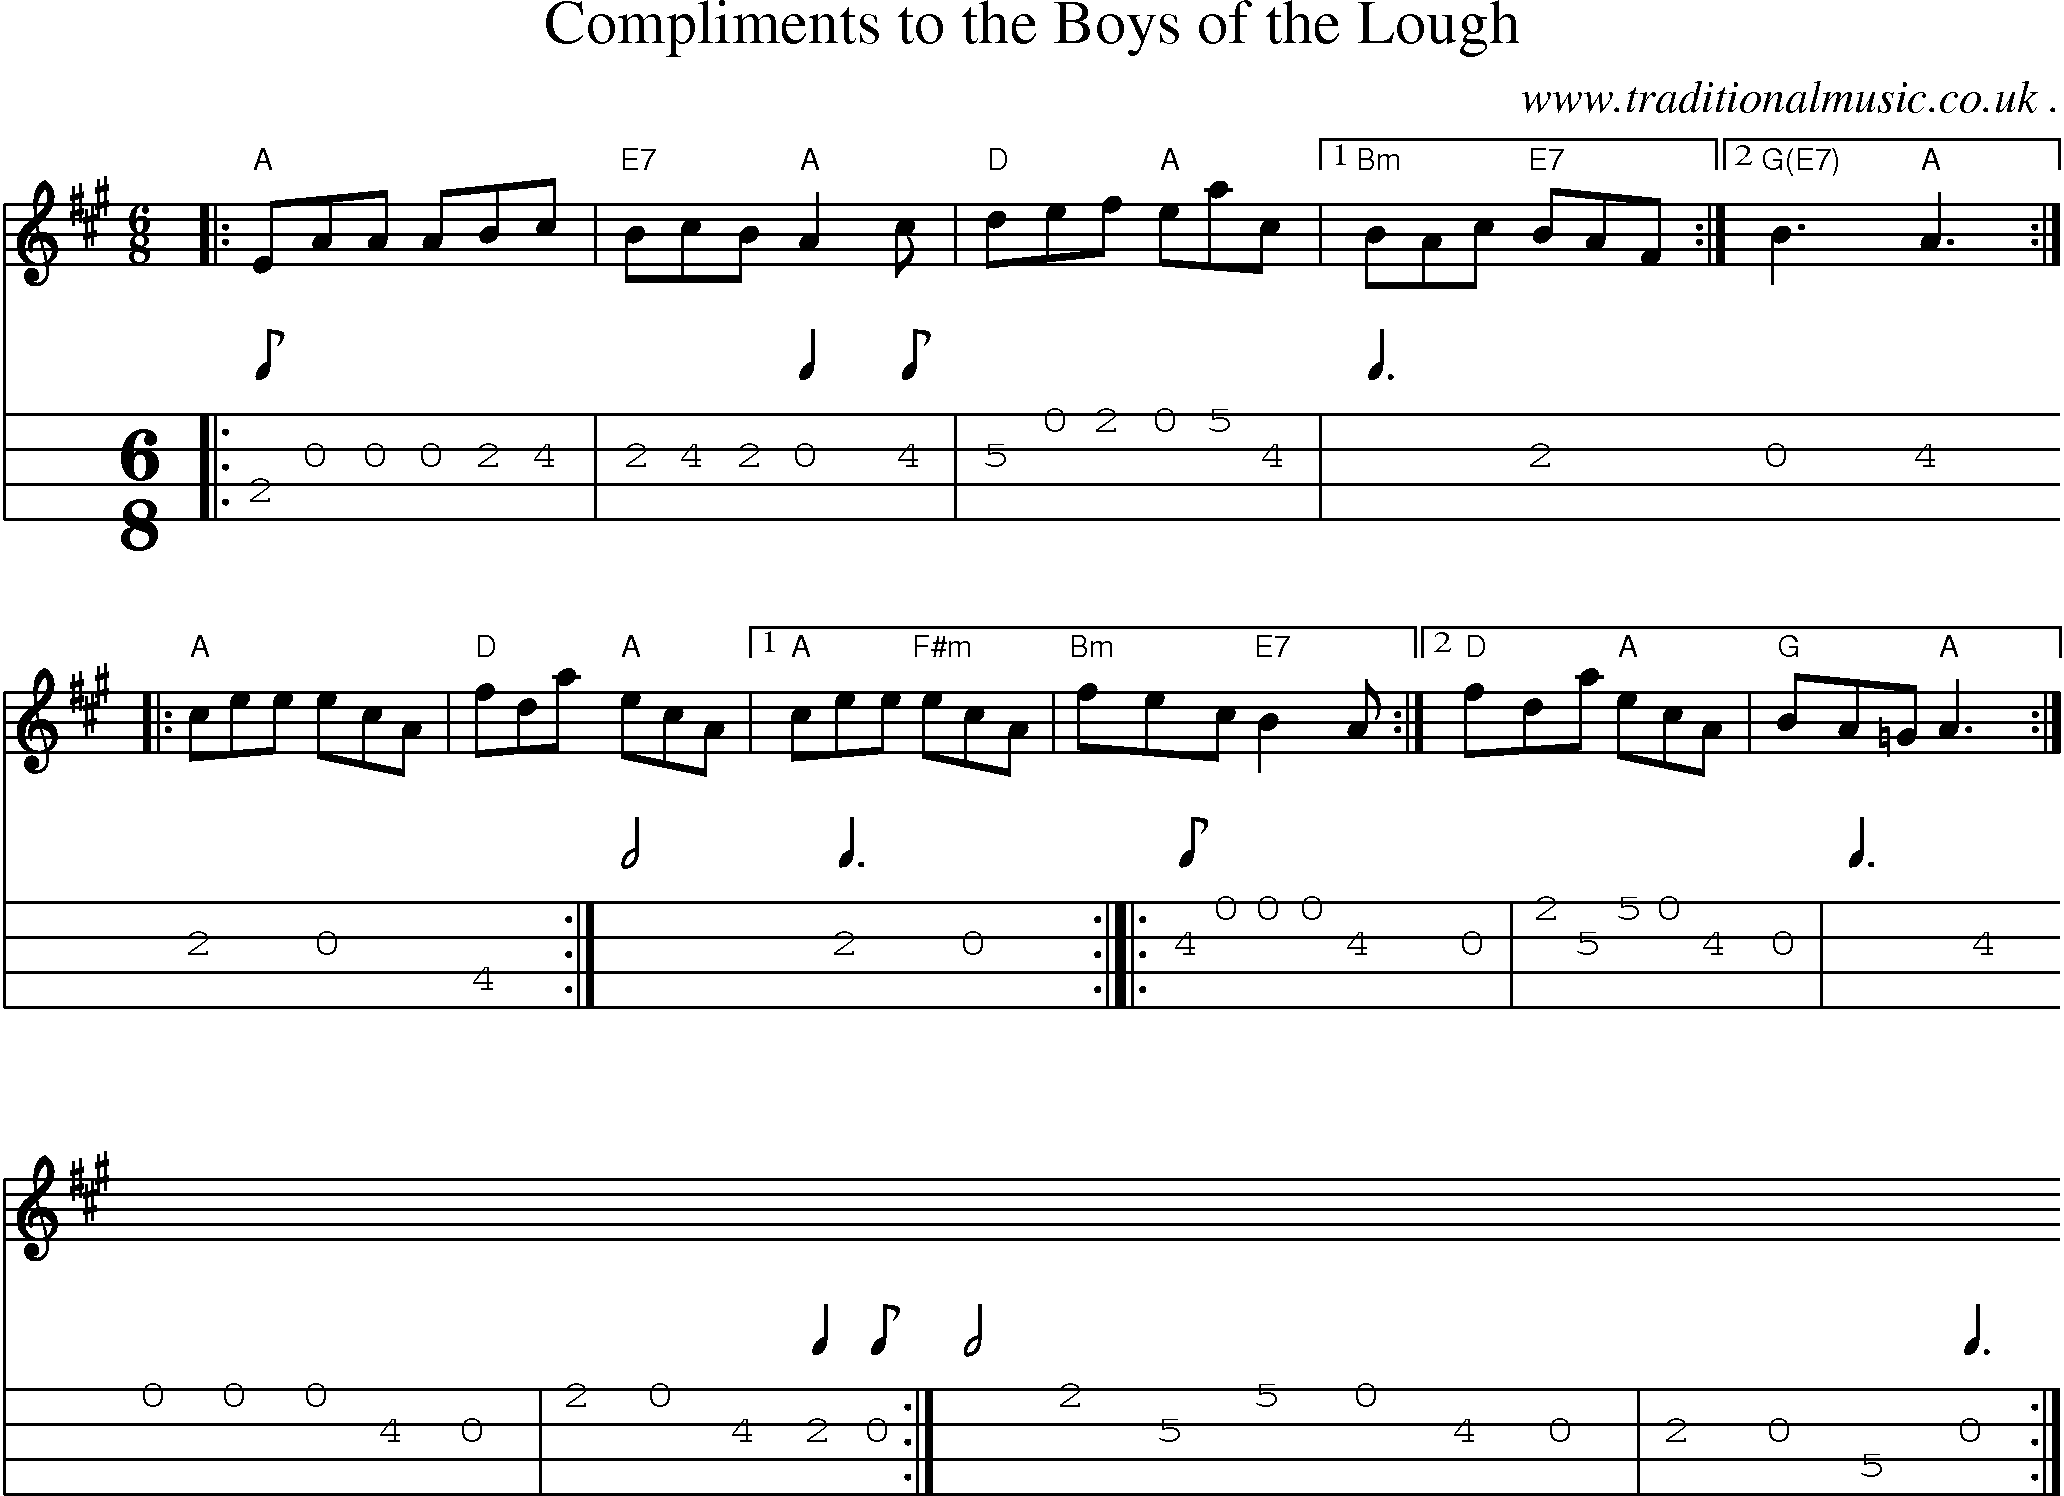 Sheet-music  score, Chords and Mandolin Tabs for Compliments To The Boys Of The Lough